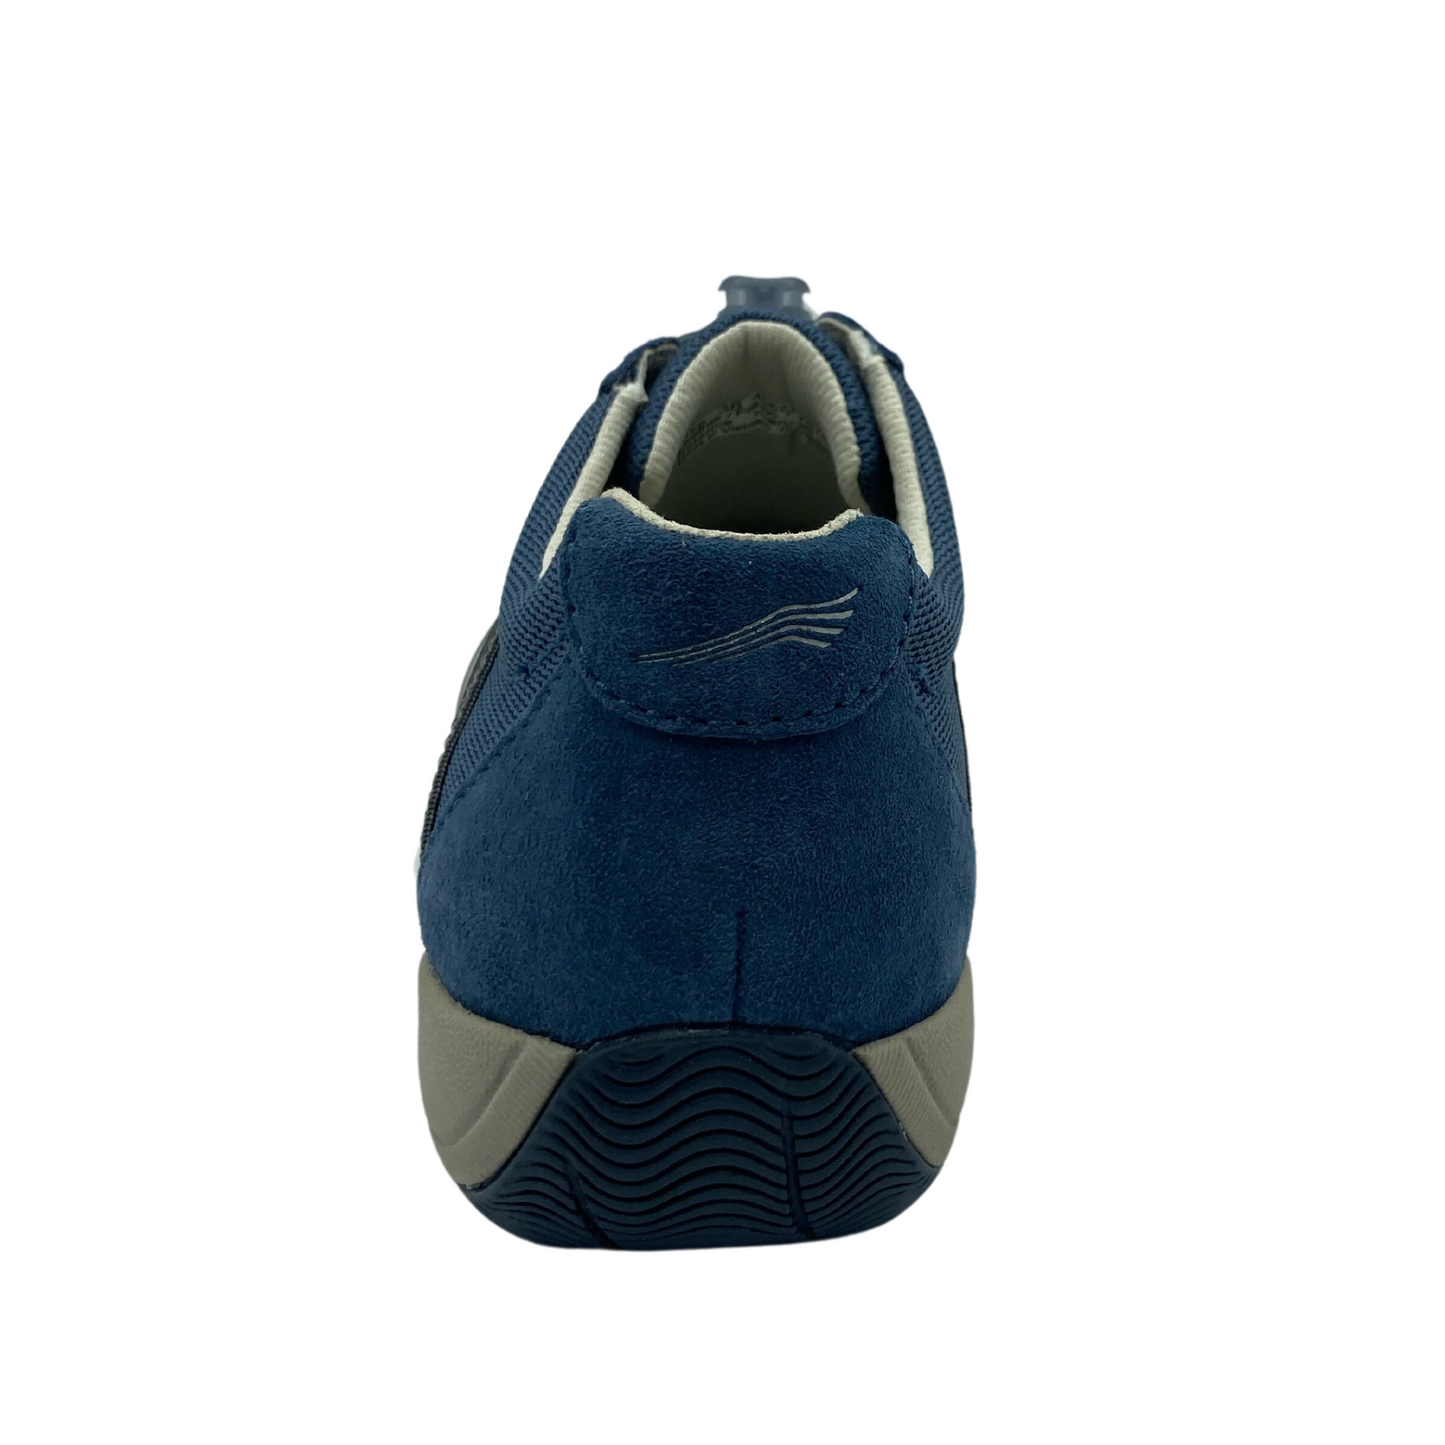 Heel view of navy suede sneaker with rubber sole